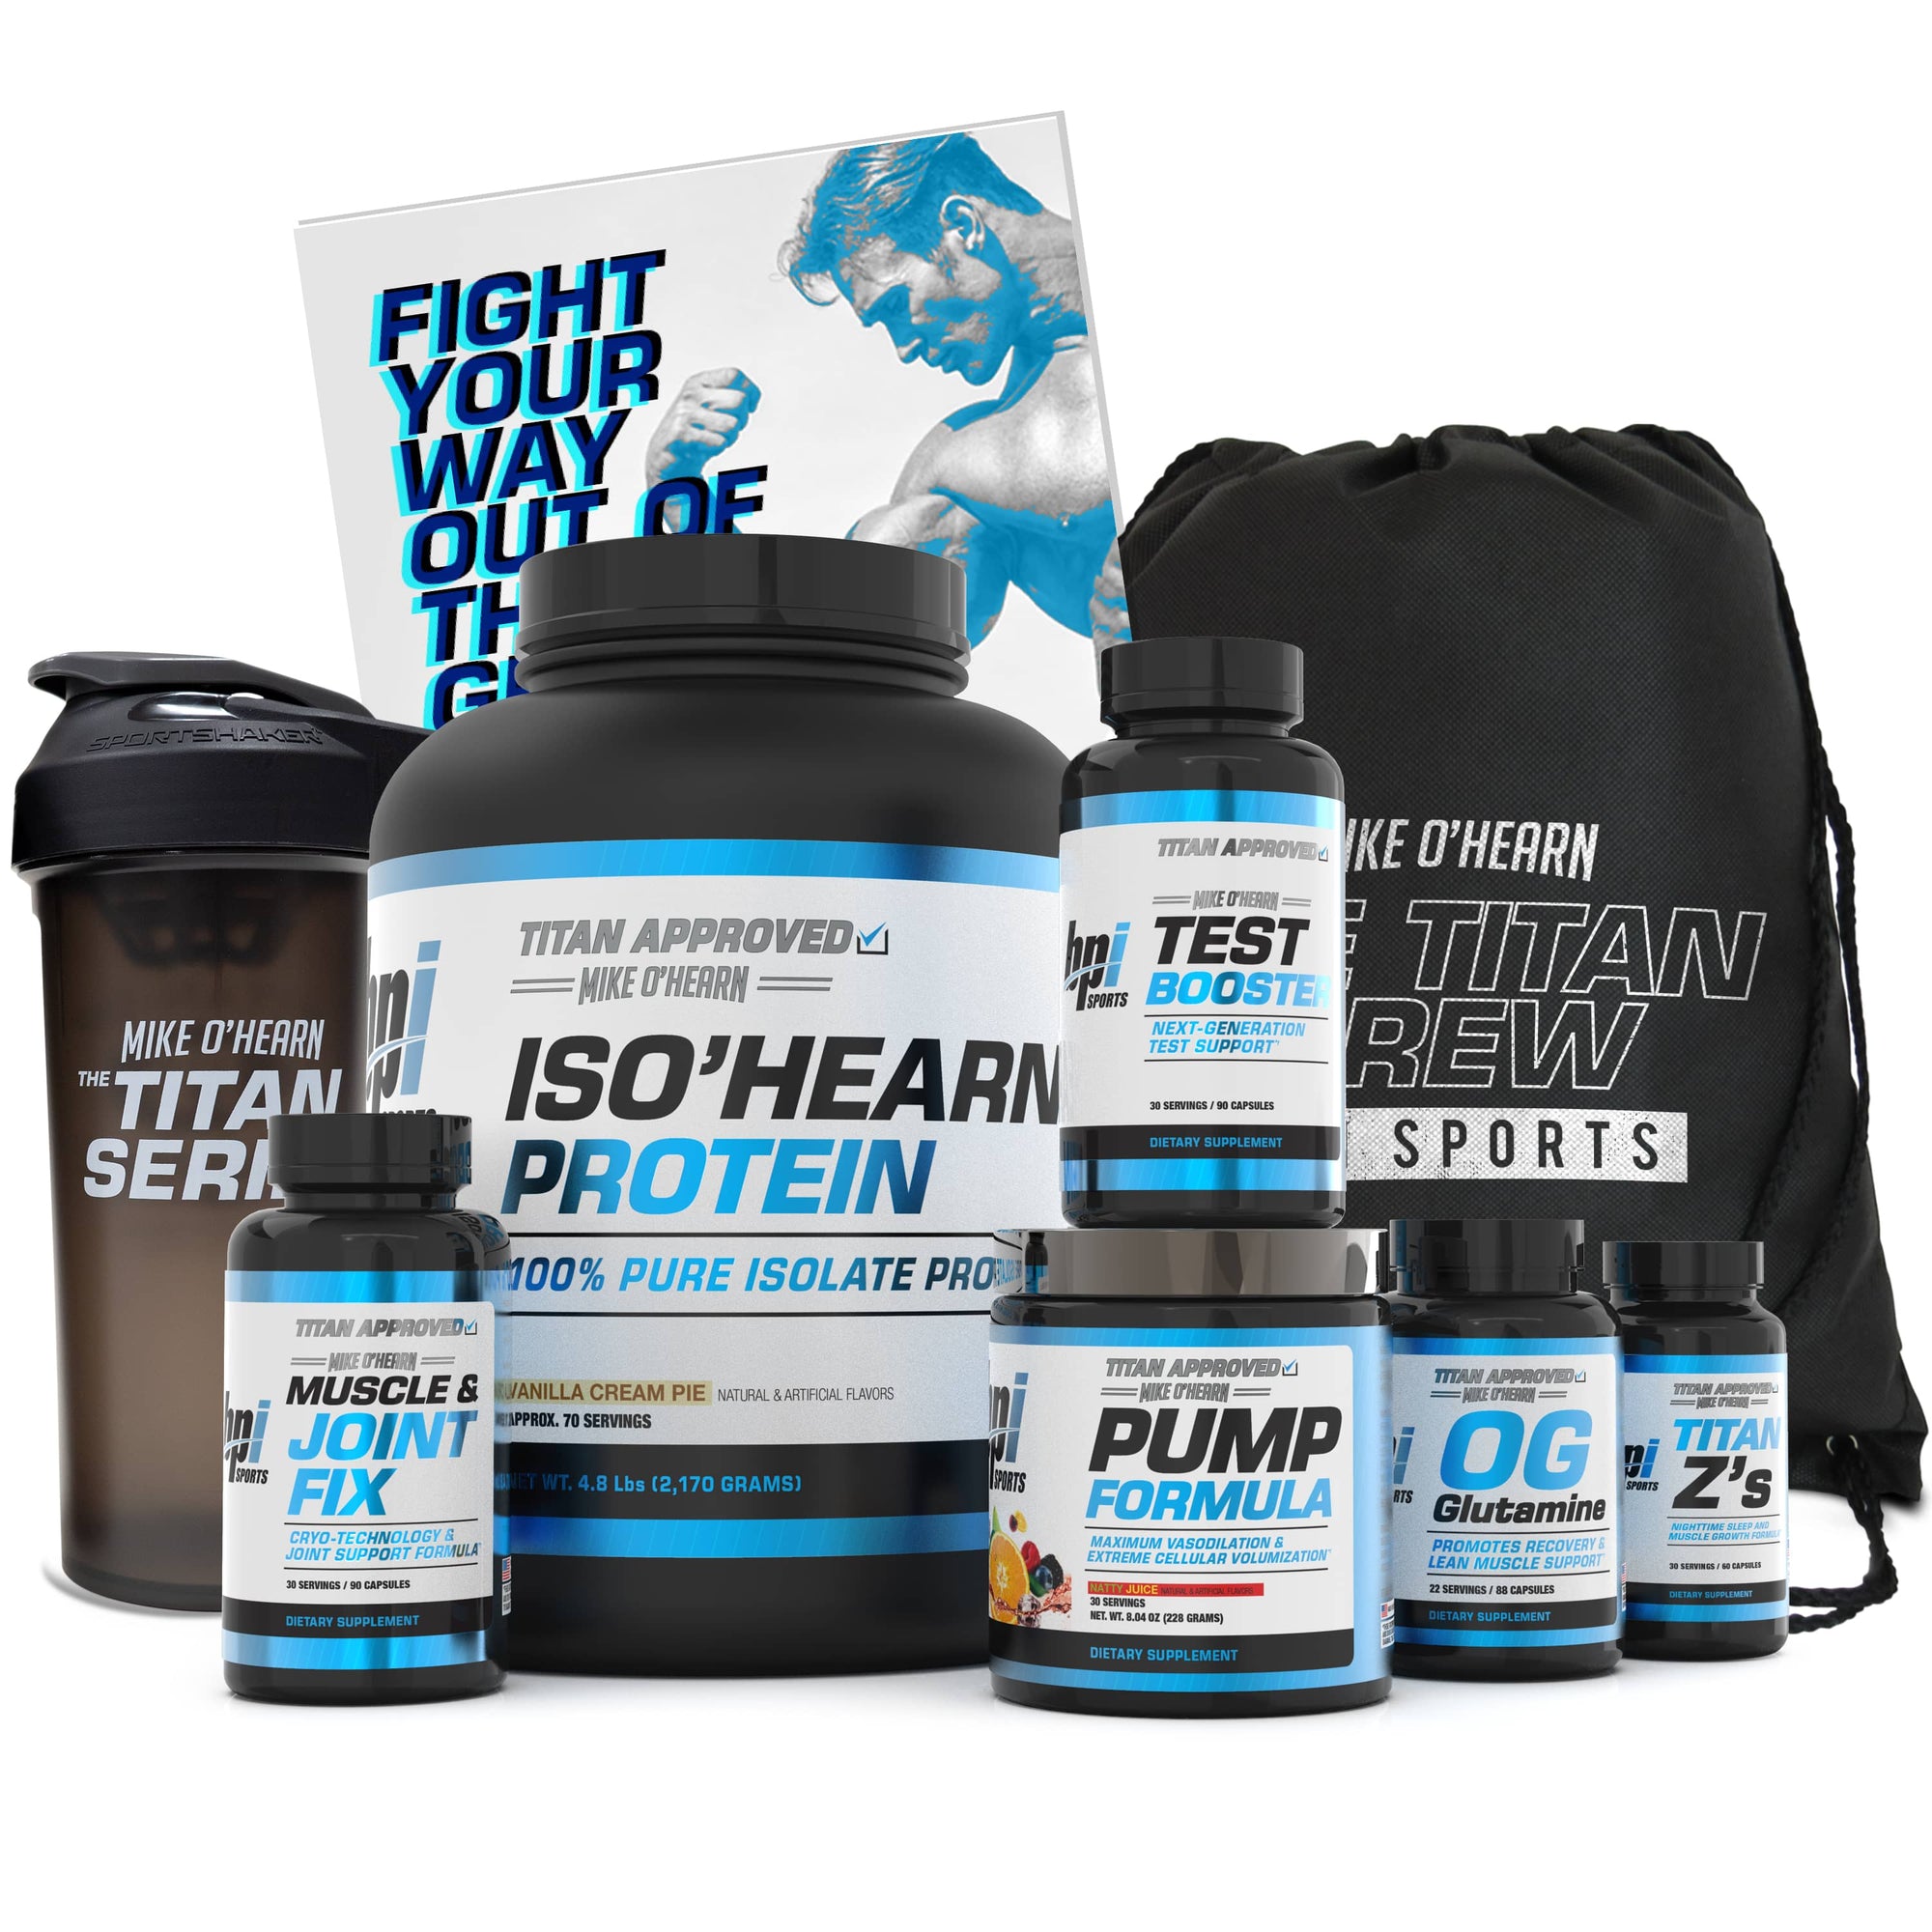 Mike O'Hearn Bundle. Includes ISO'HEARN IN VANILLA CREAM PIE  OG GLUTAMINE  TITAN Z'S  MIKE O'HEARN TITAN SERIES SHAKER CUP  TITAN CREW DRAWSTRING BAG  HOW TO BUILD STUBBORN BICEPS EBOOK  PUMP FORMULA IN NATTY JUICE  MUSCLE & JOINT FIX  TEST BOOSTER